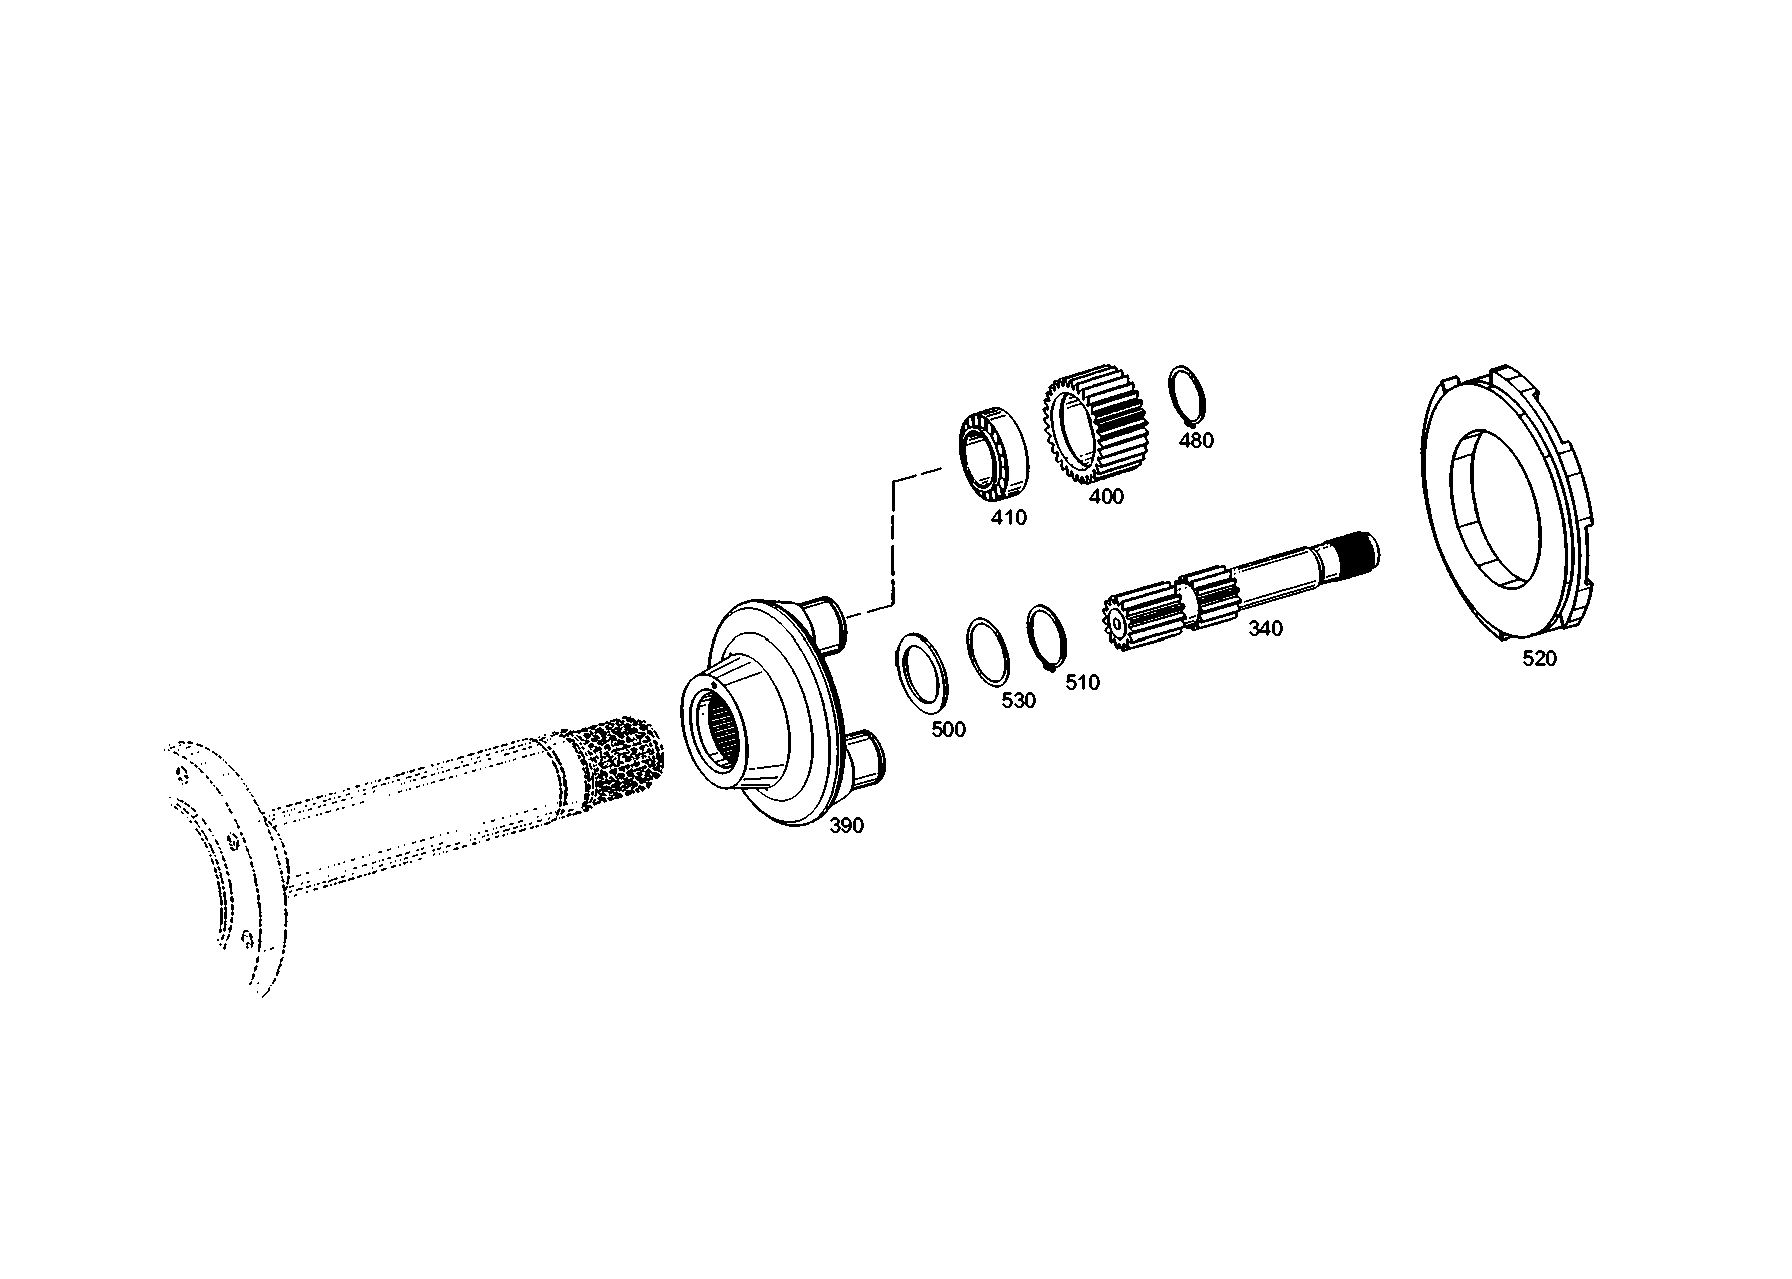 drawing for HAMM AG 1282387 - WASHER (figure 4)